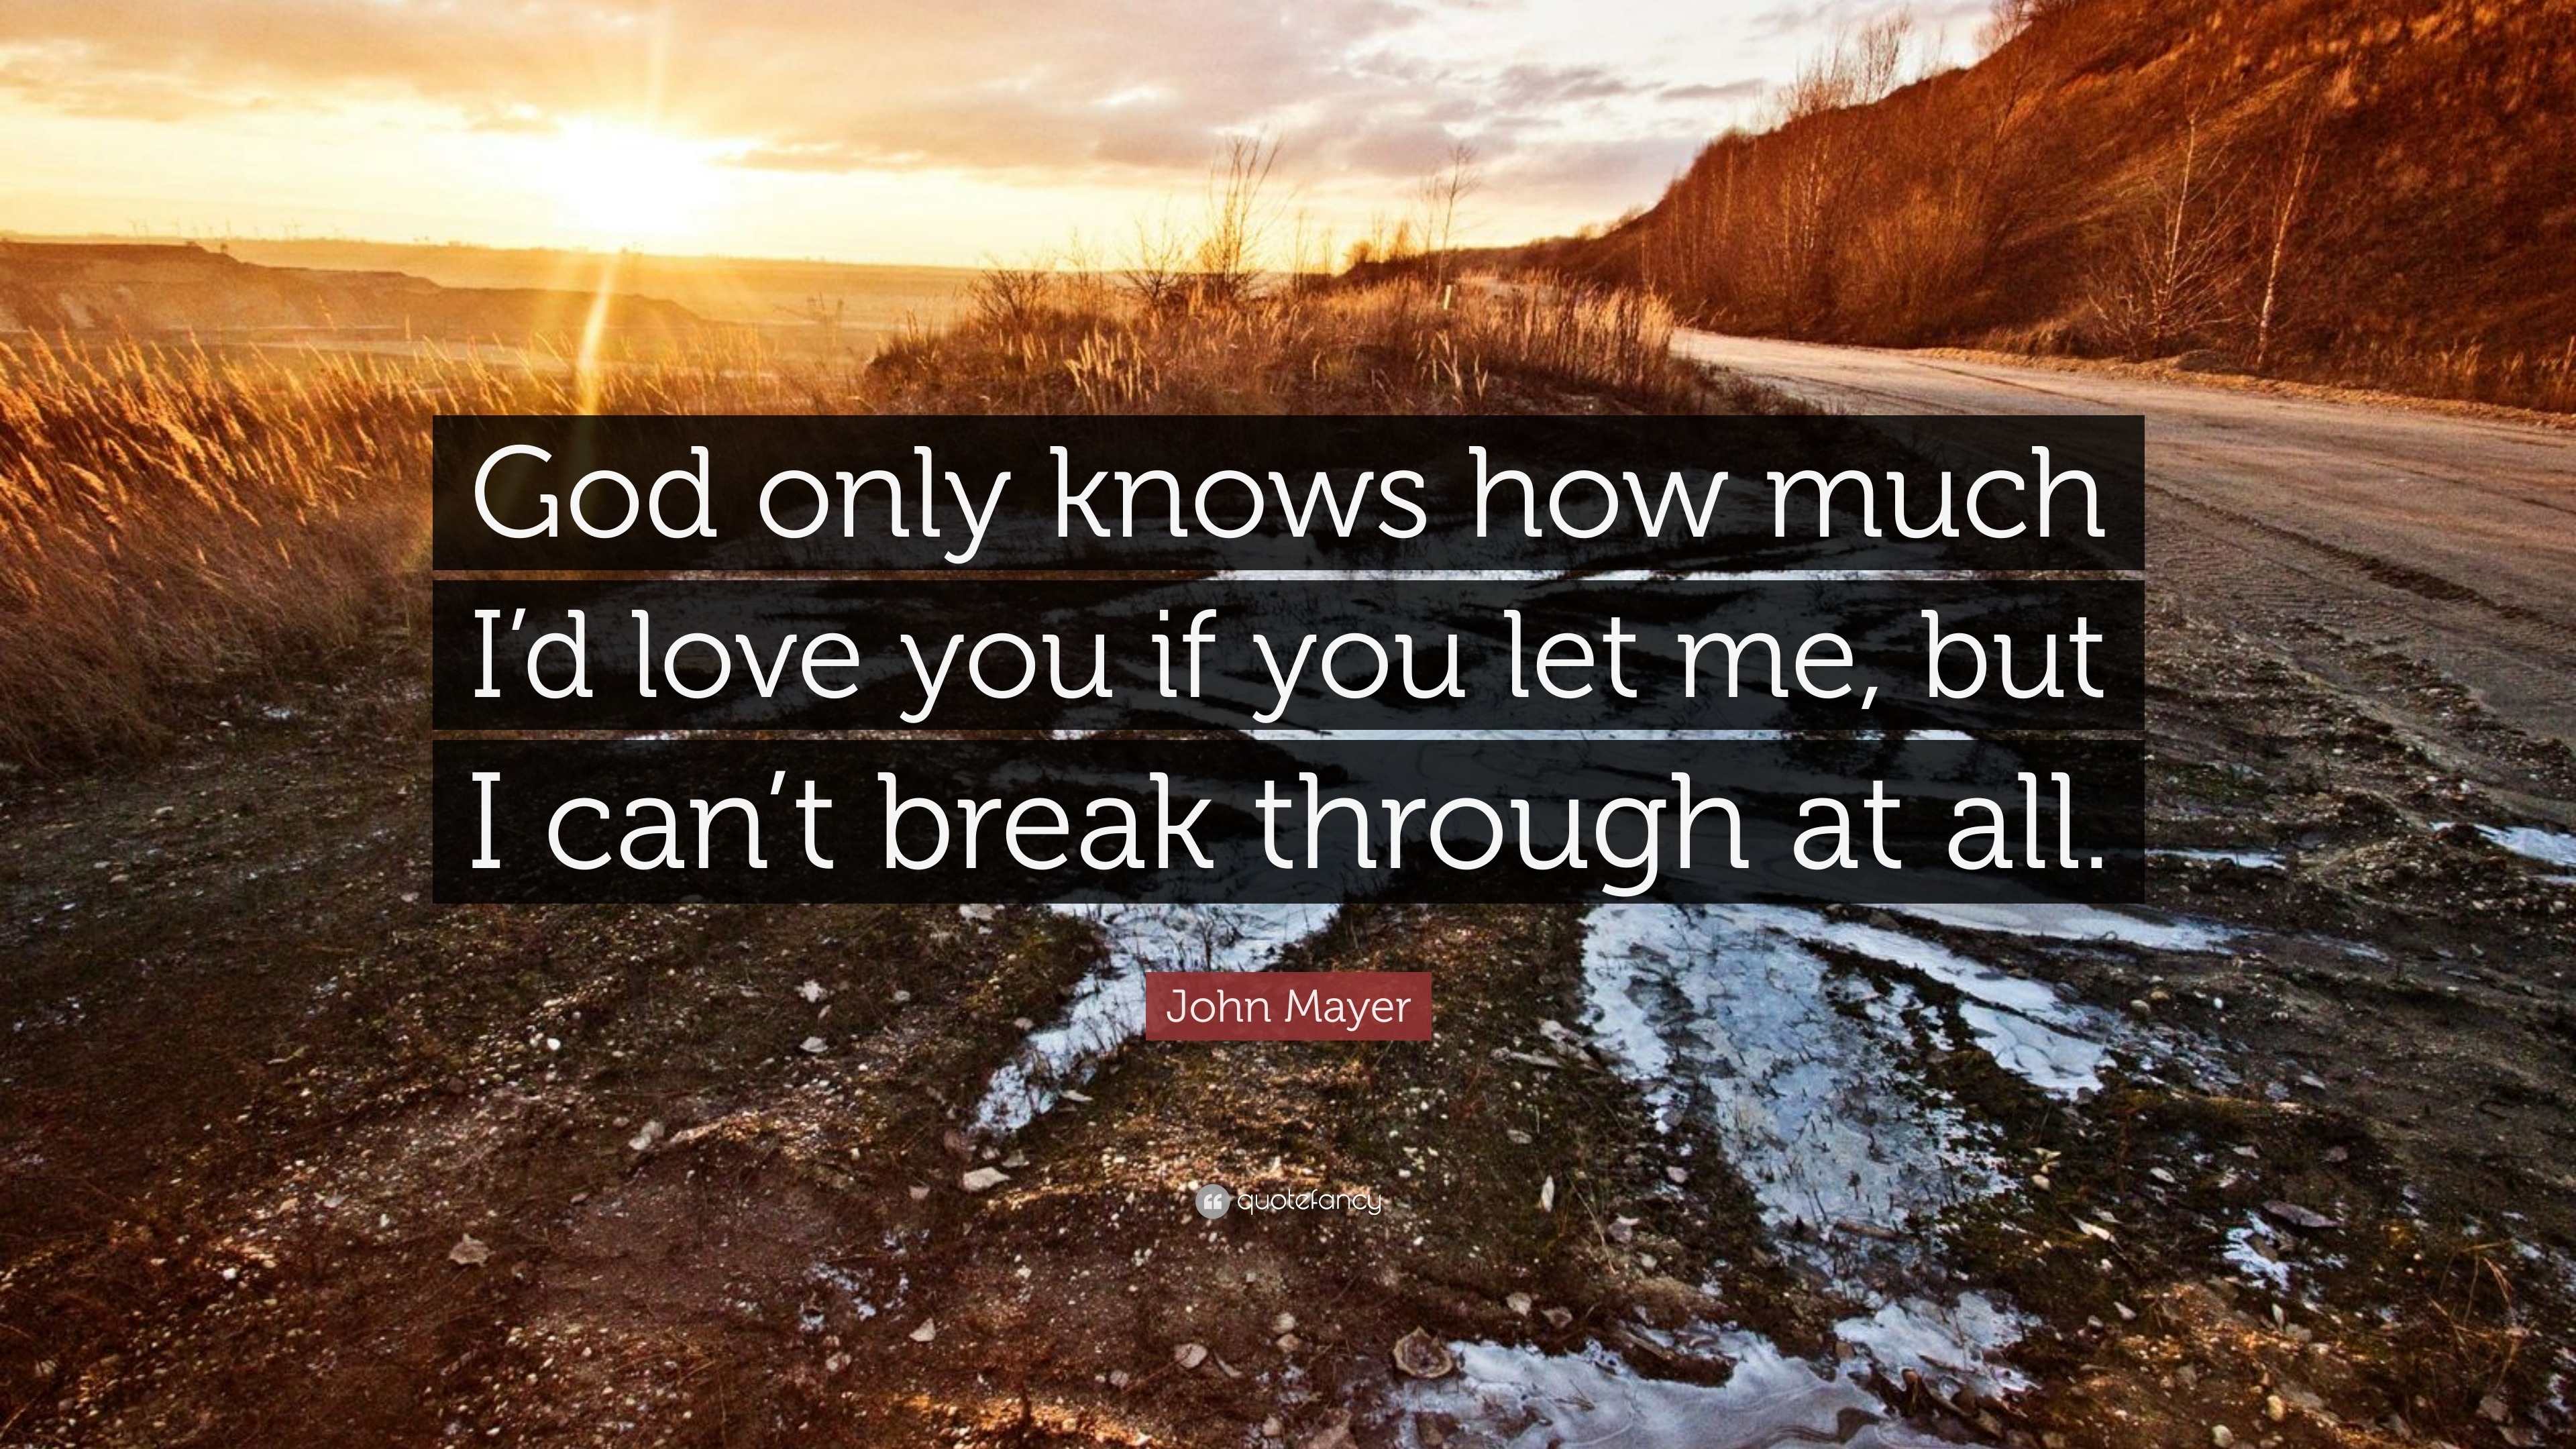 John Mayer Quote “God only knows how much I d love you if